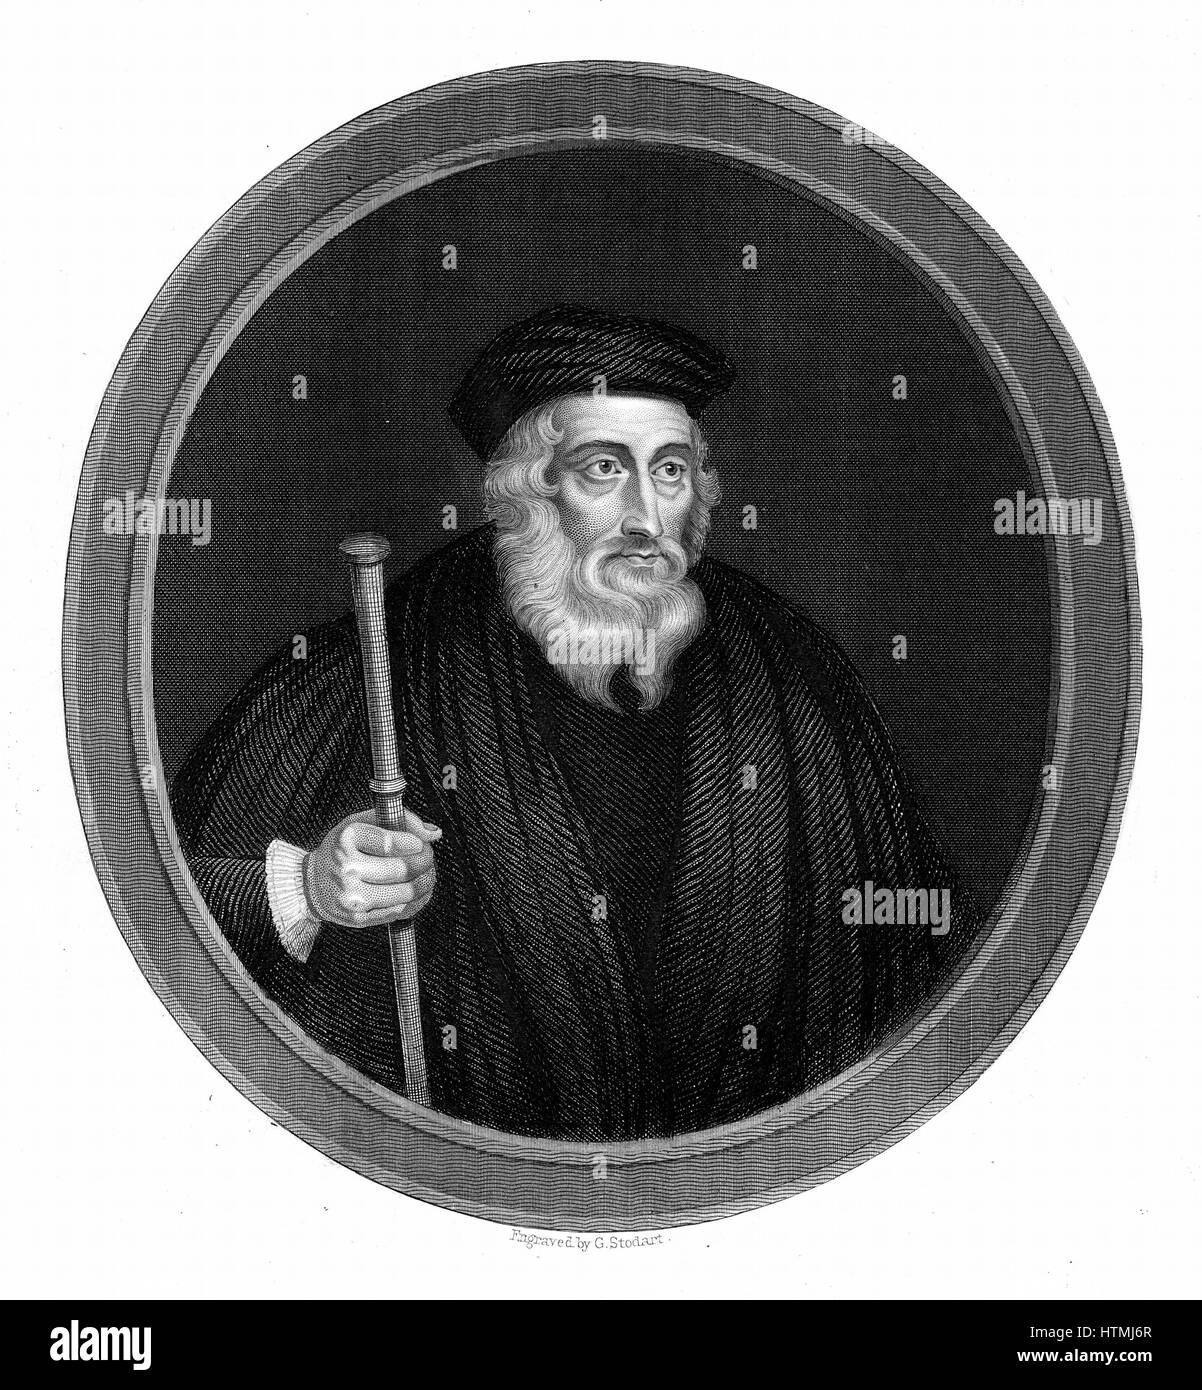 John Wycliffe (c13291384) English religious reformer. Leader of the Lollards (Mumblers). Questioned doctrine of transubstantiation. Organised translation of Bible into English. Precursor of Protestant Reformation. Engraving 1851. Stock Photo